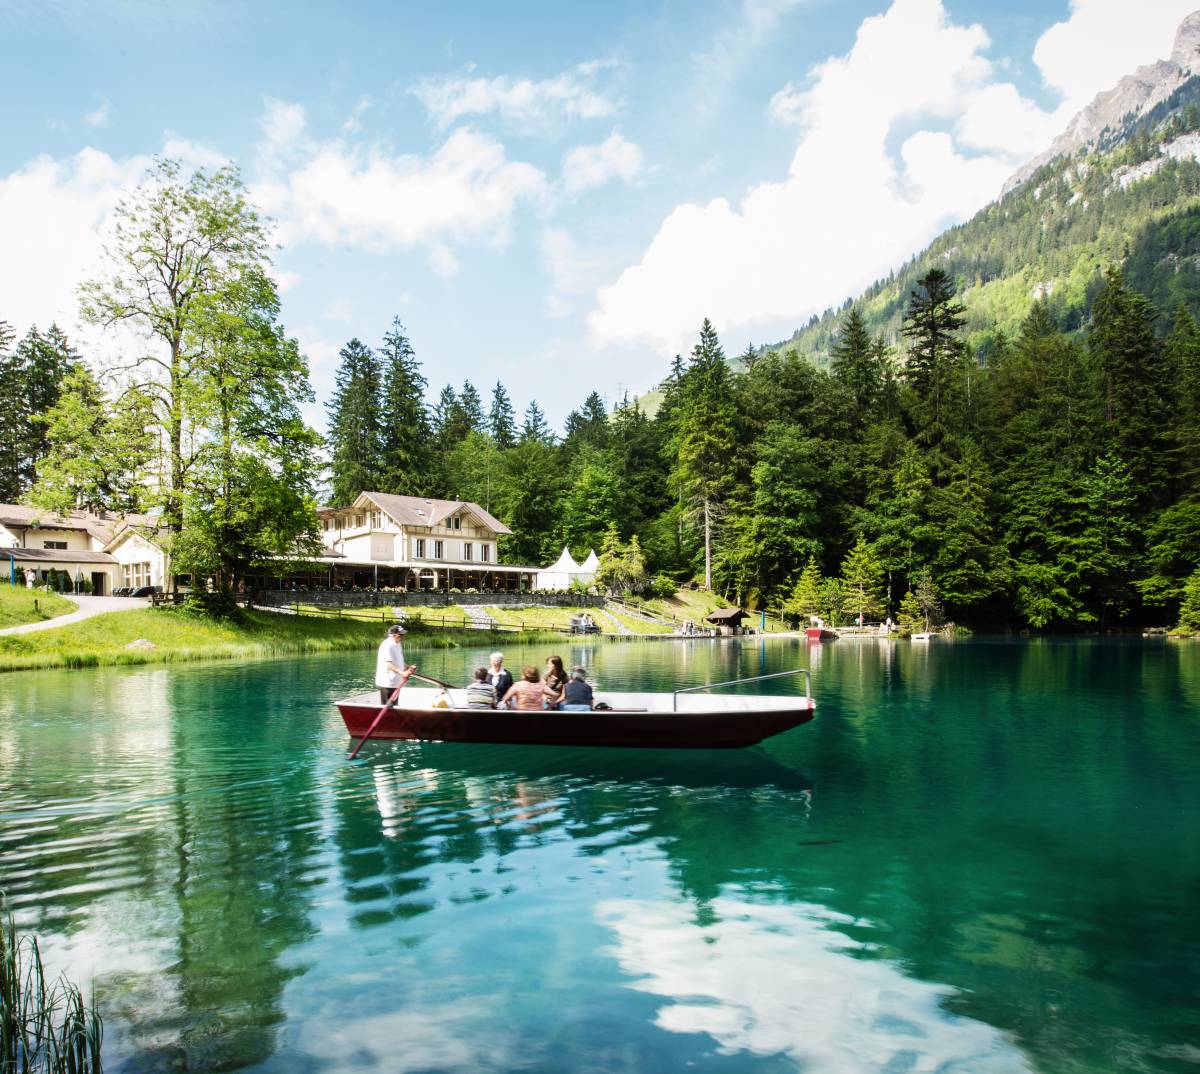  Boat trip on the Blausee in Switzerland